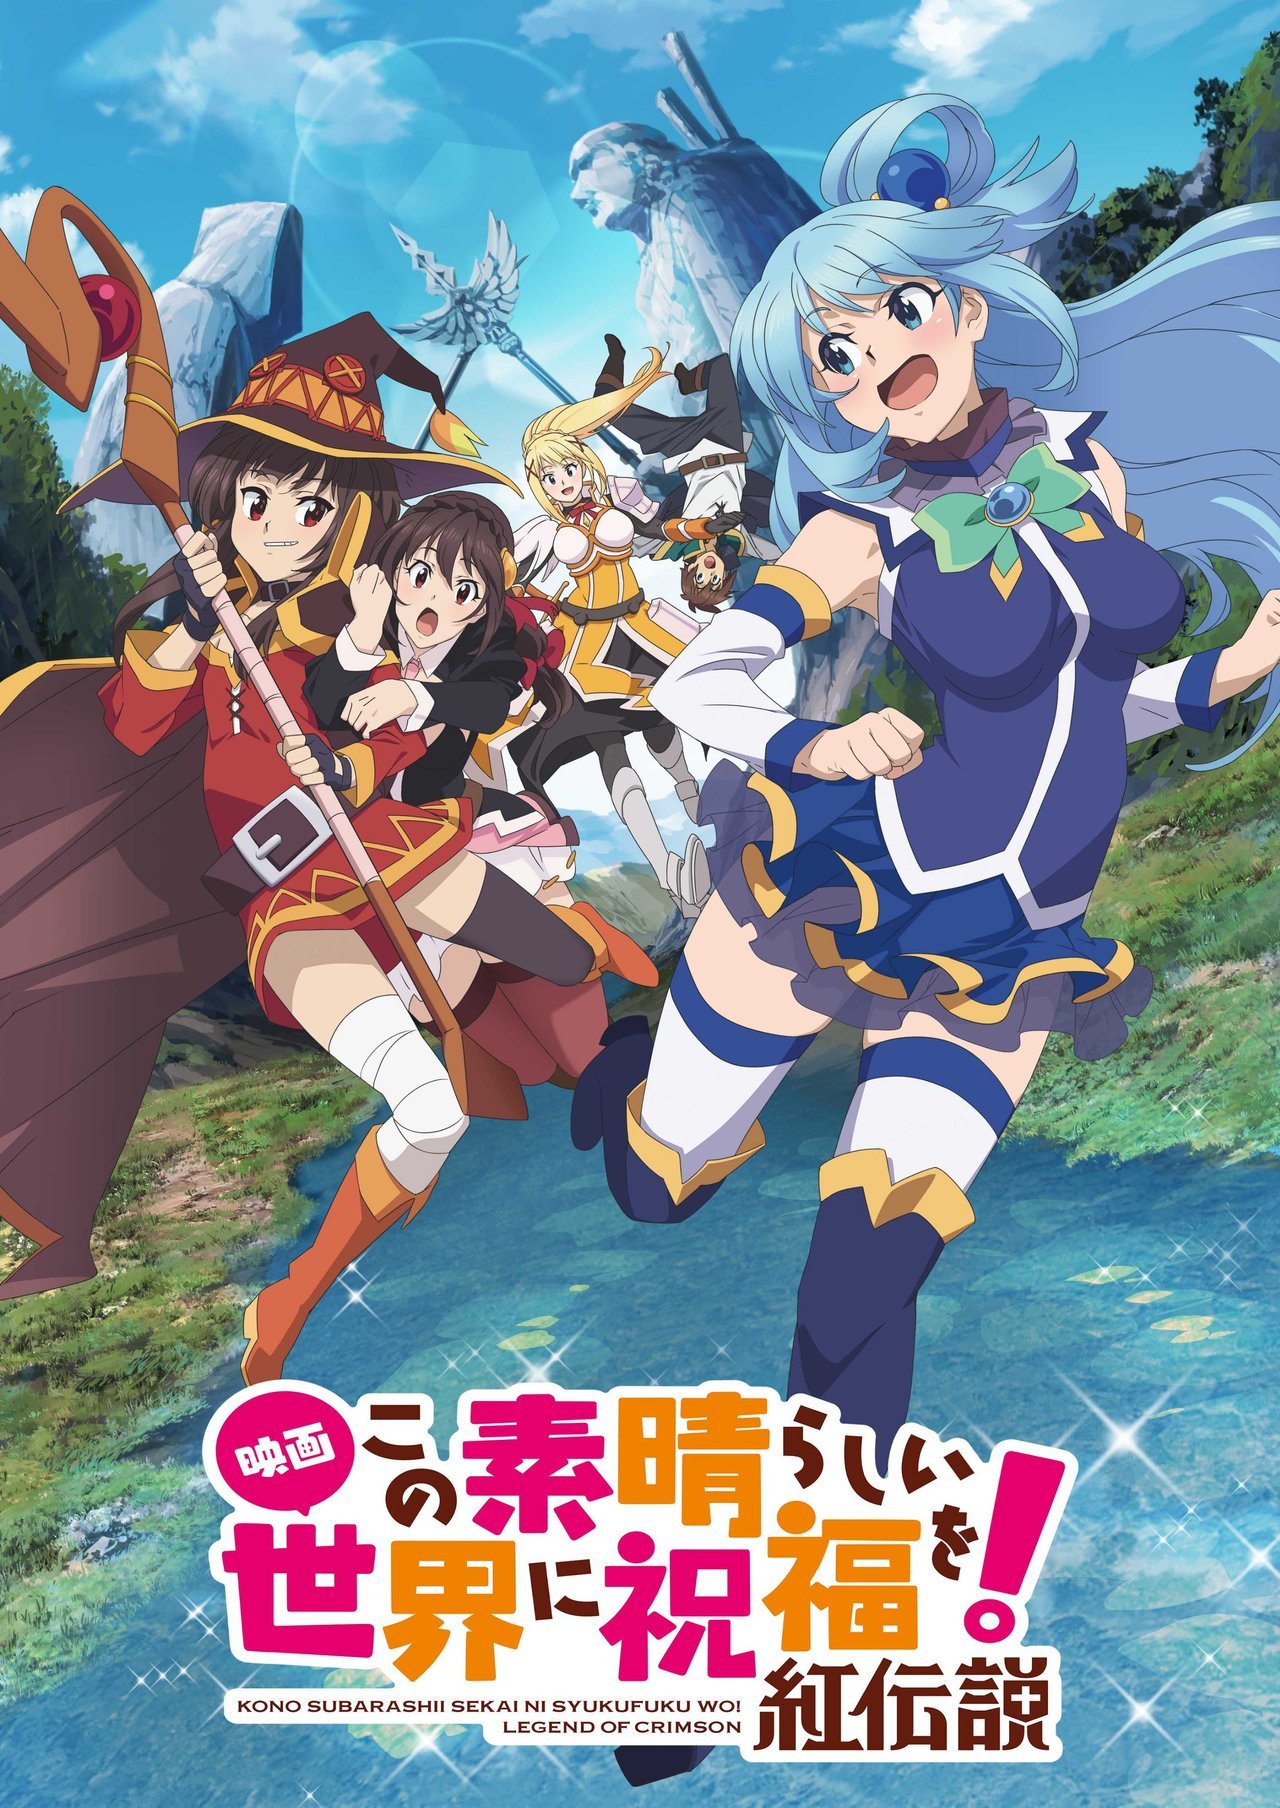 A new poster visual and PV for the anime film âKonoSuba: Kurenai Densetsuâ has been released. The movie is expected to open in Japanese theaters in 2019. -Staff-â¢ Director: Takaomi Kanasaki â¢ Script: Makoto Uezu â¢ Character Design: Kouichi Kikuta â¢...